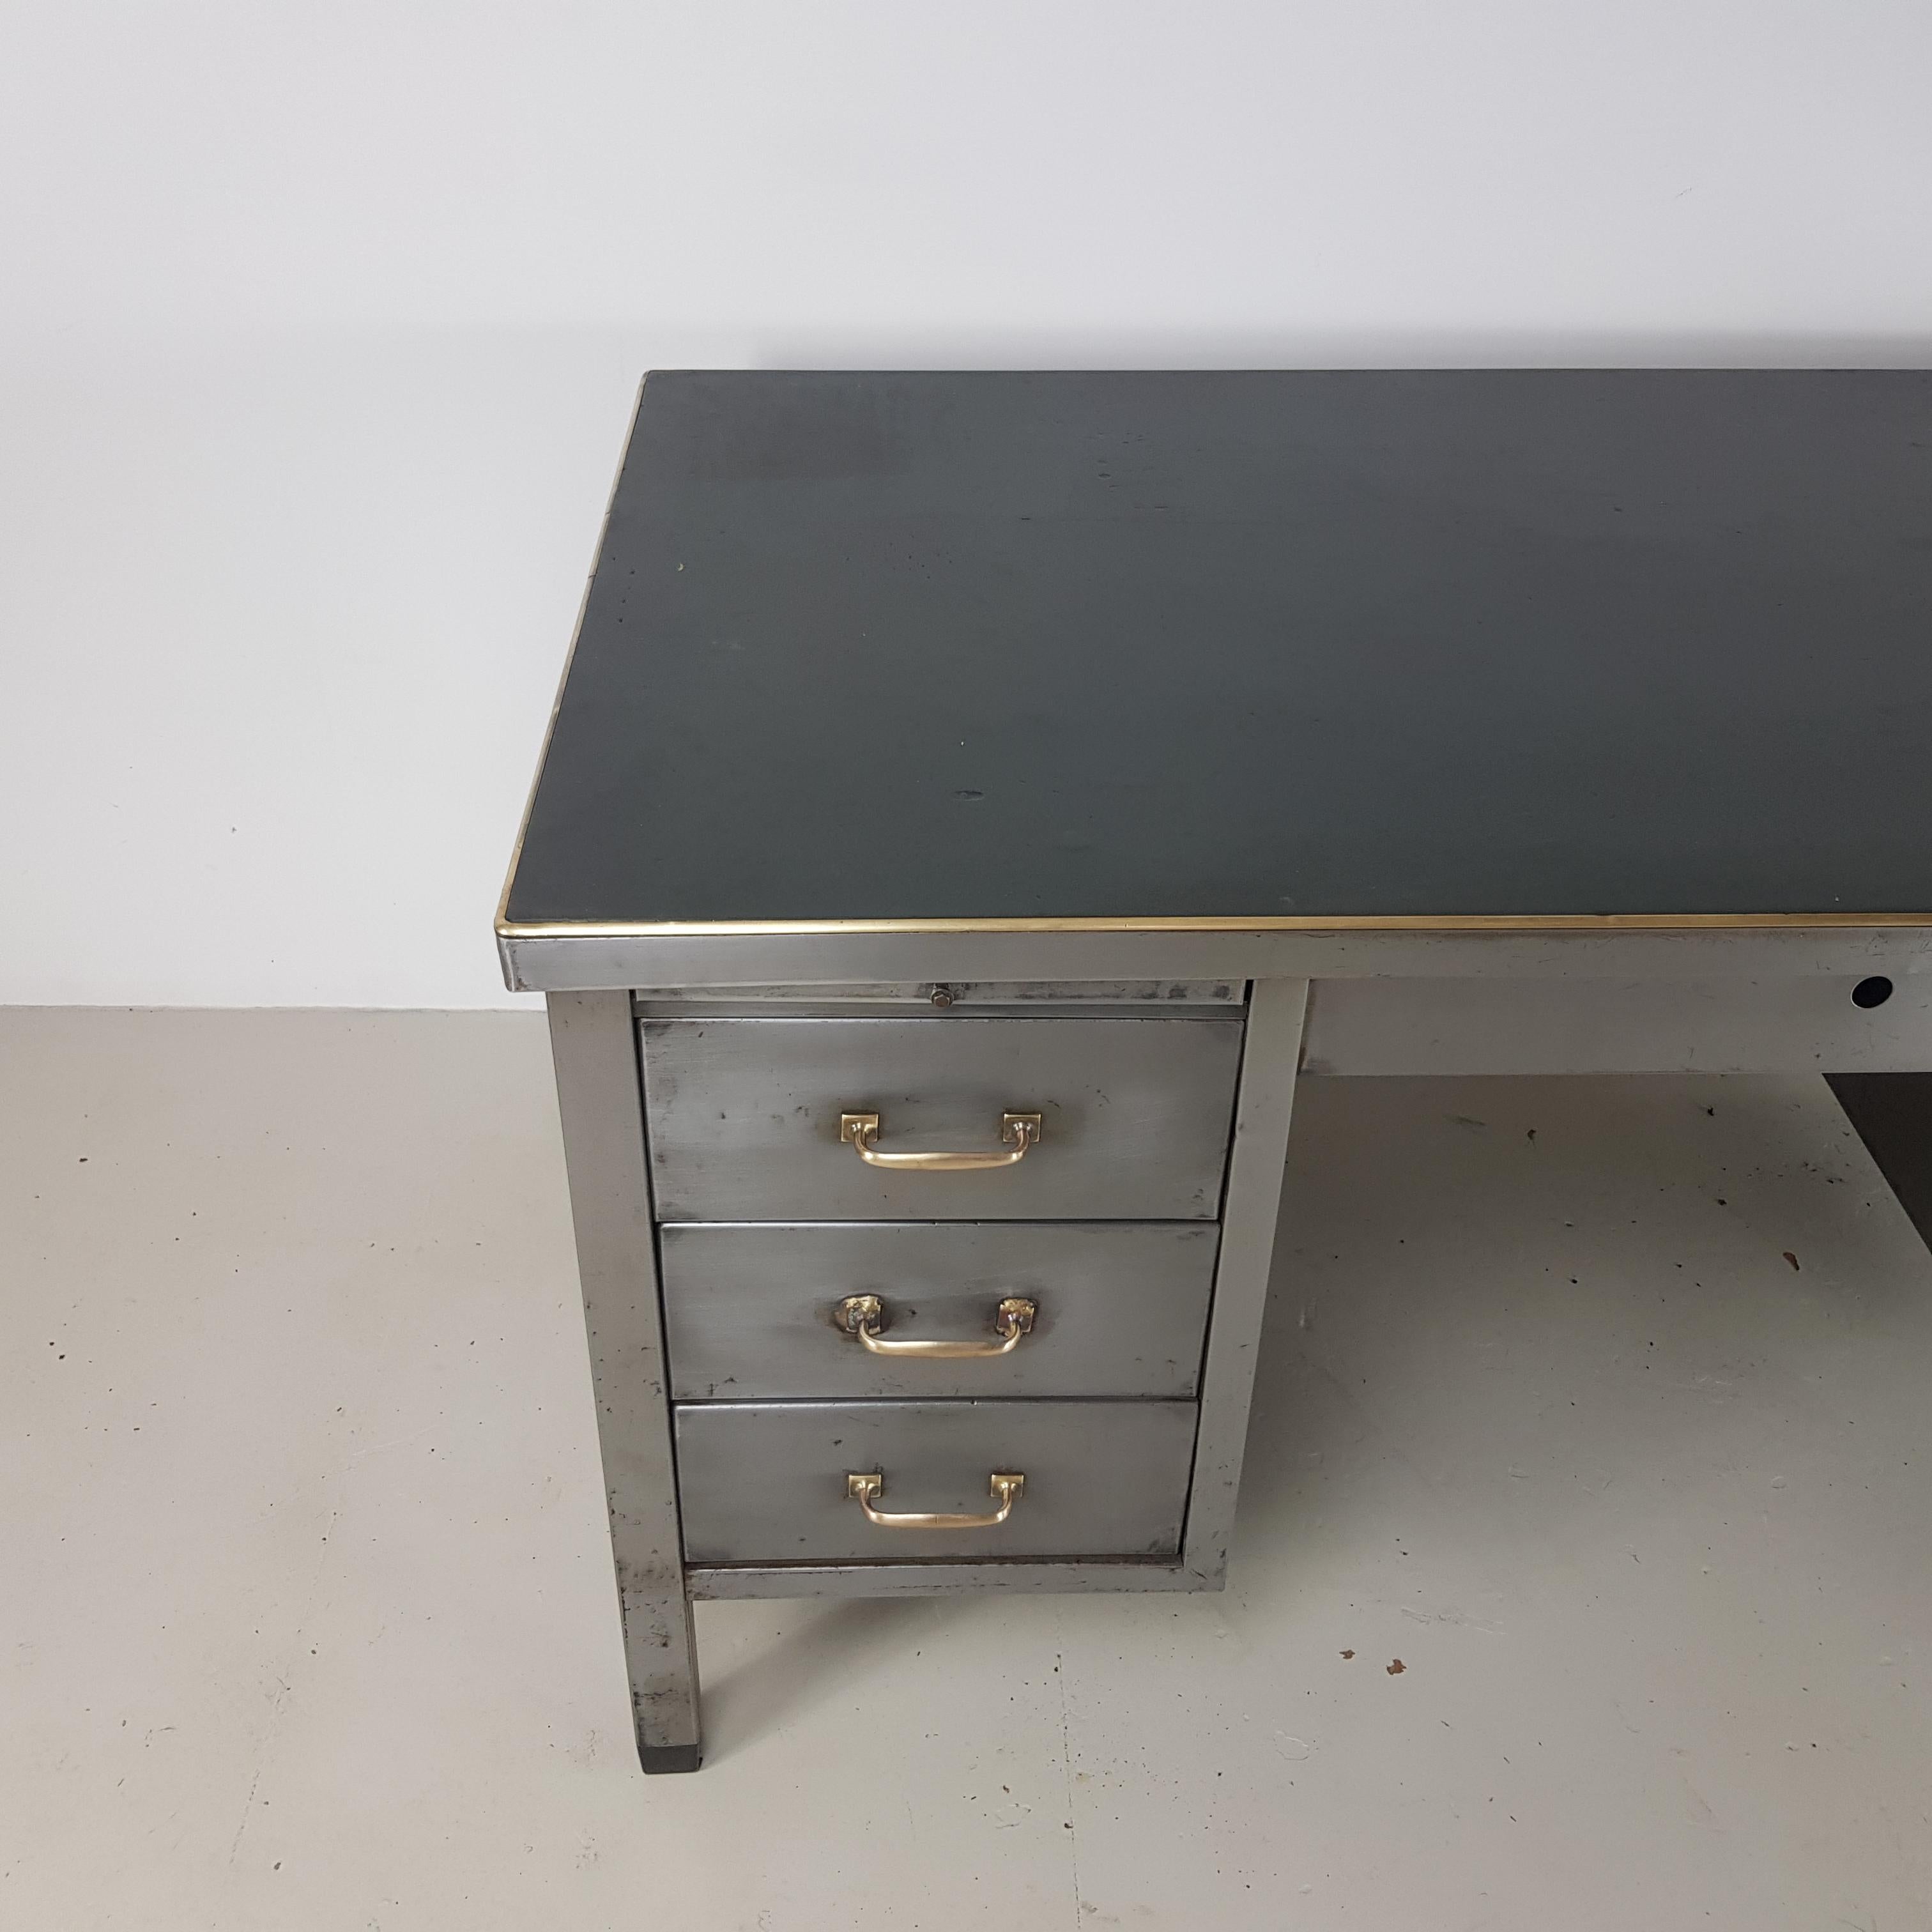 Lovely vintage double pedestal polished steel desk.

In good vintage condition - this piece comes from a working Industrial environment and as such, has signs of wear and tear commensurate with age i.e bumps, scuffs etc, all adding to the